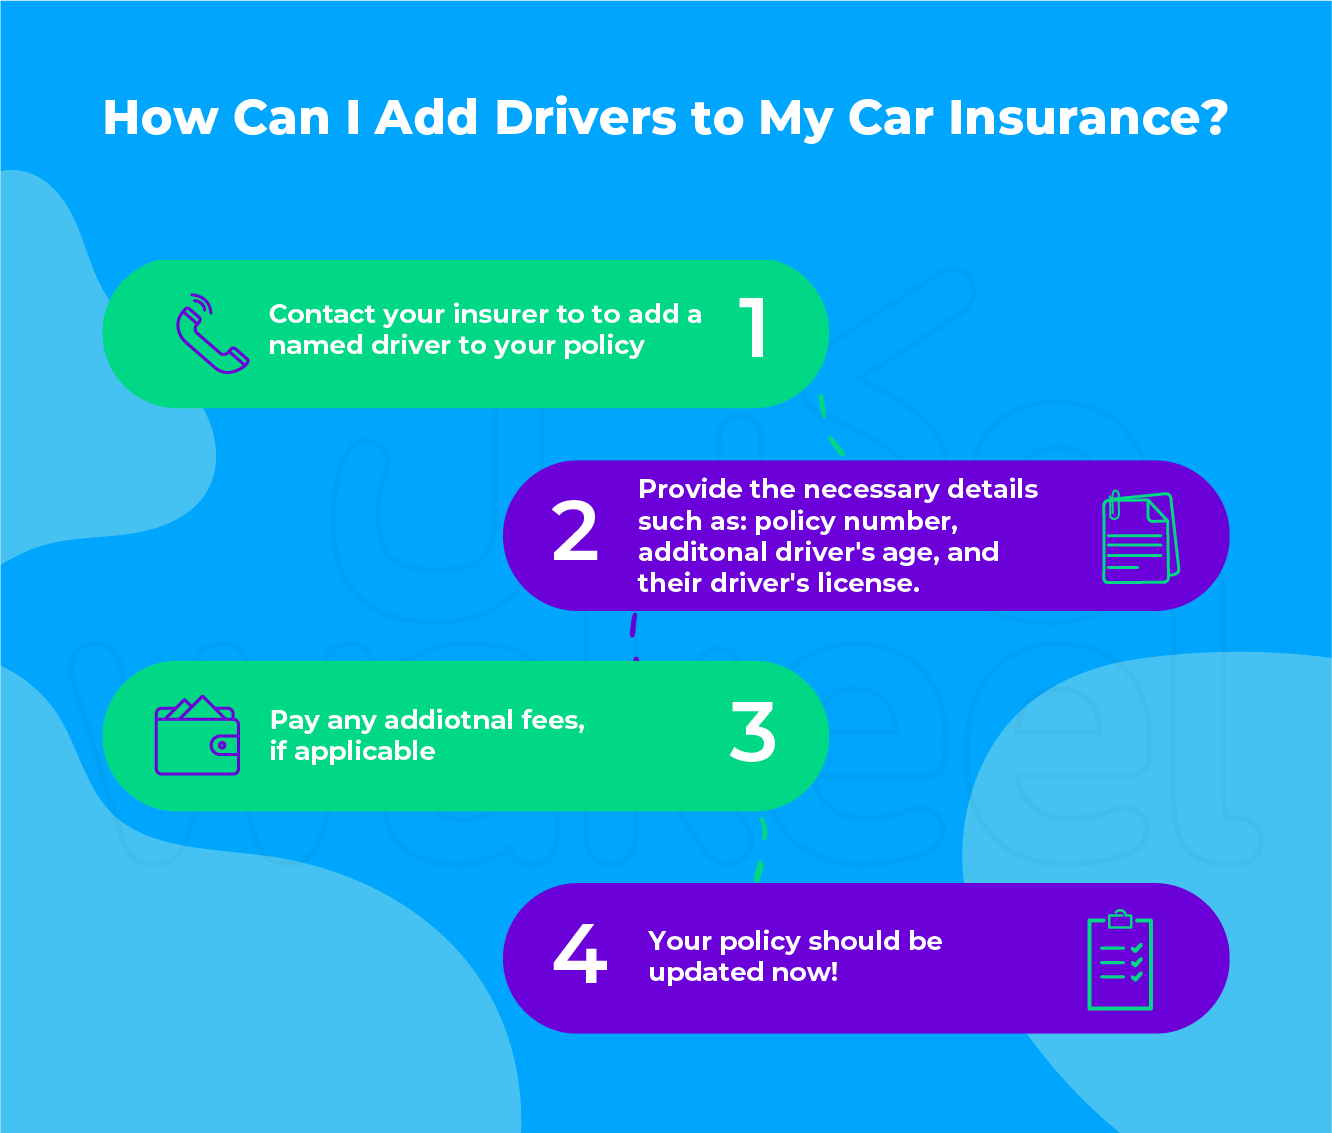 Steps on how to add additional drivers to your car insurance.